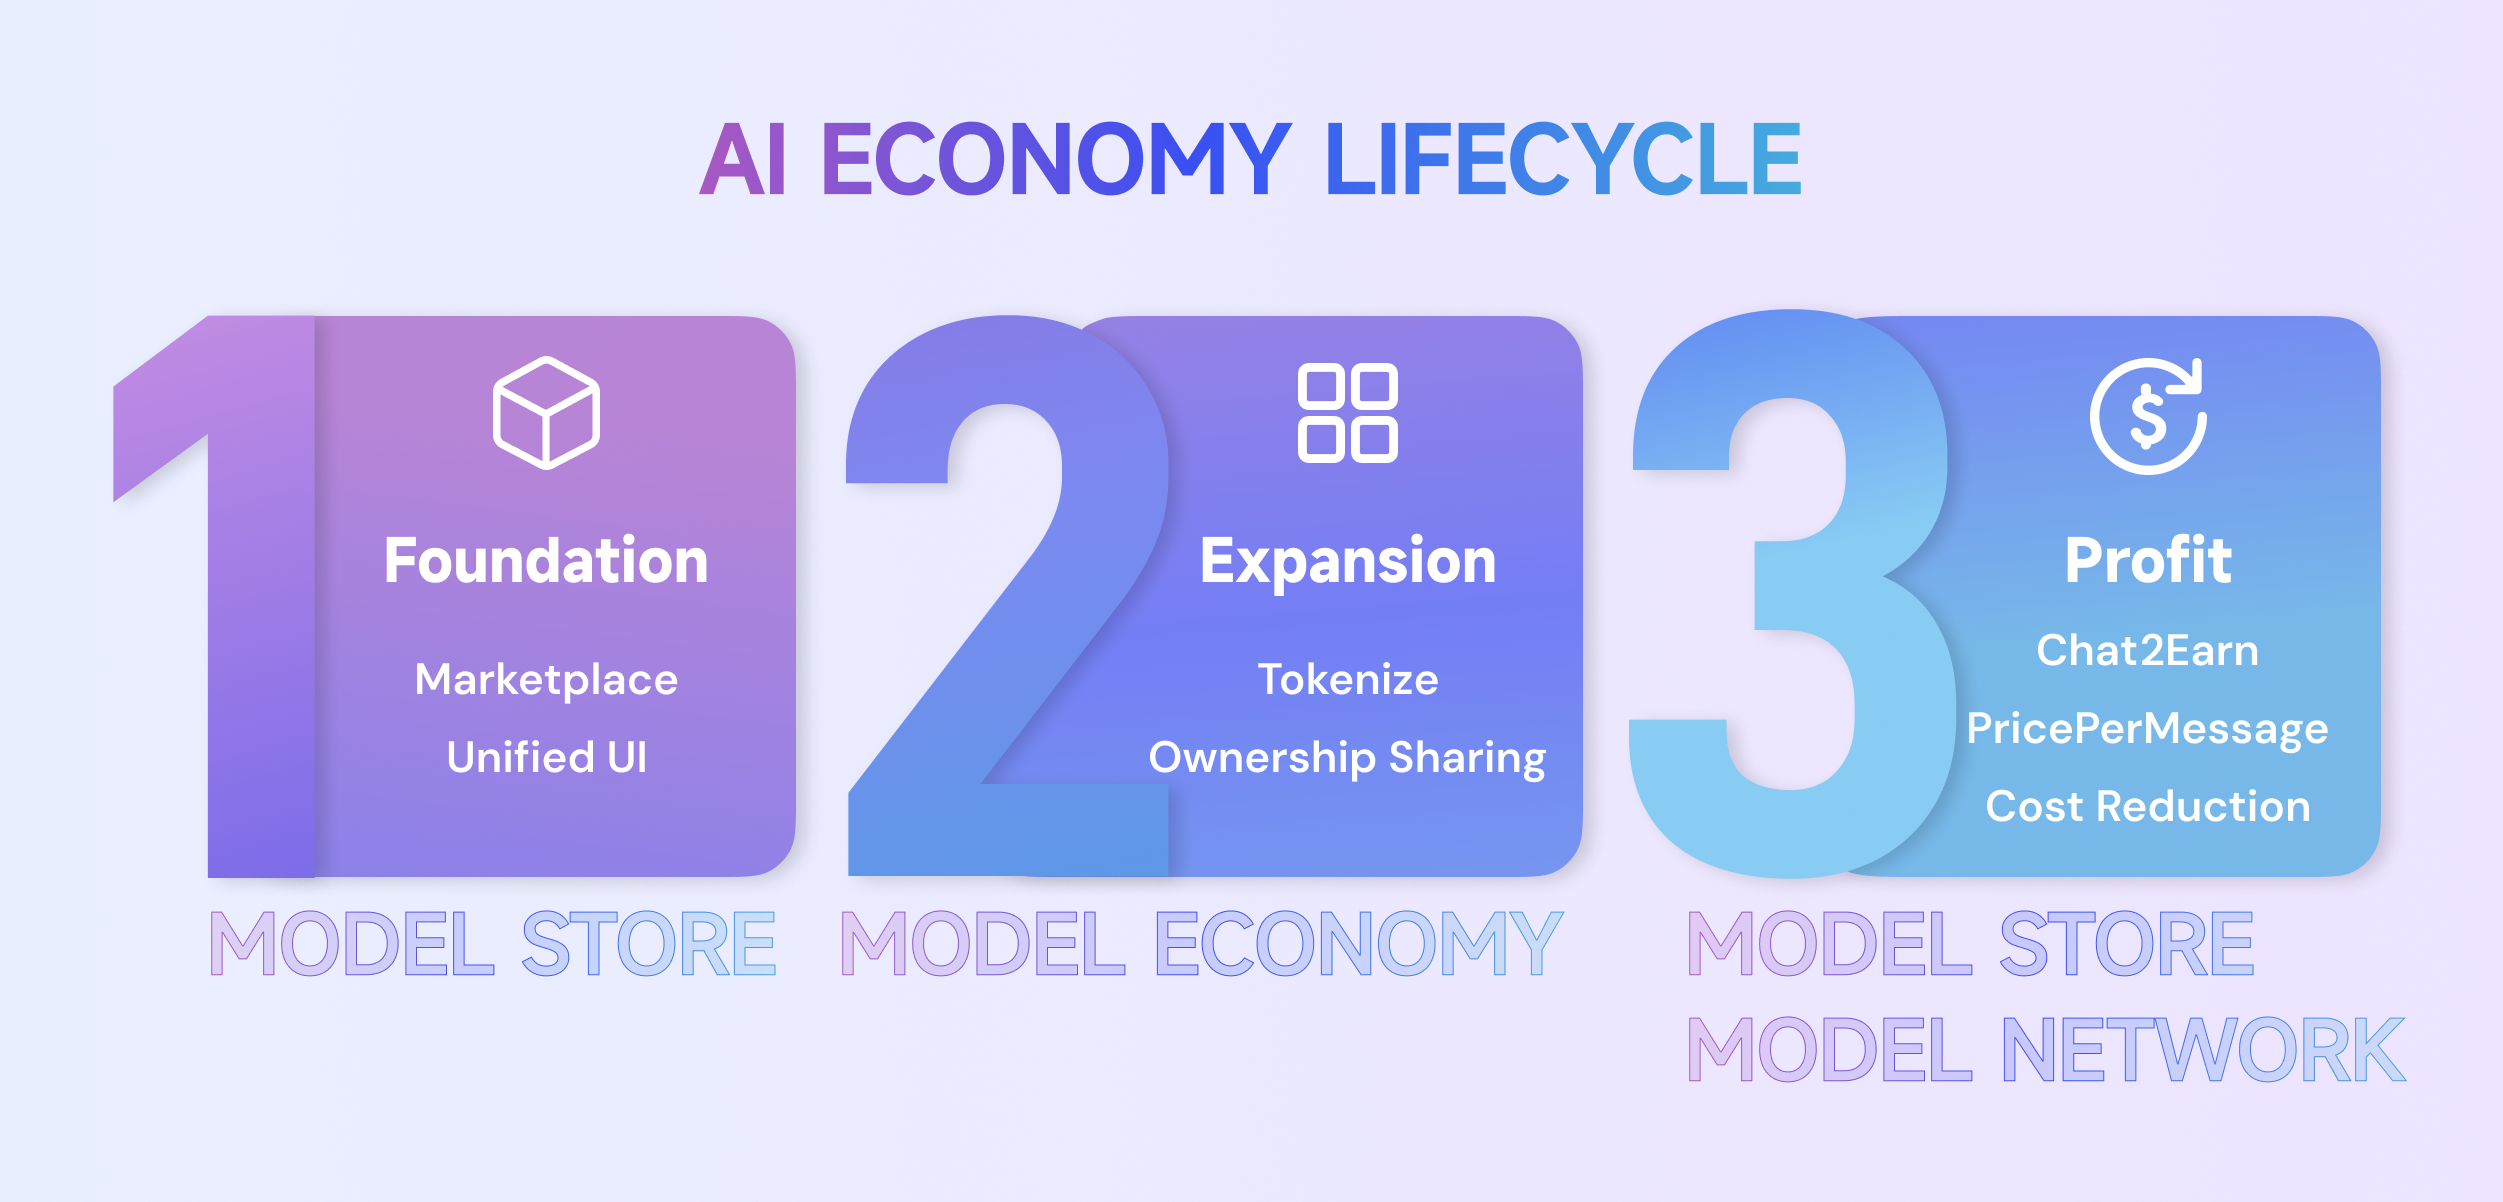 How does the MagnetAI Trinity work in the AI Economy Lifecycle?